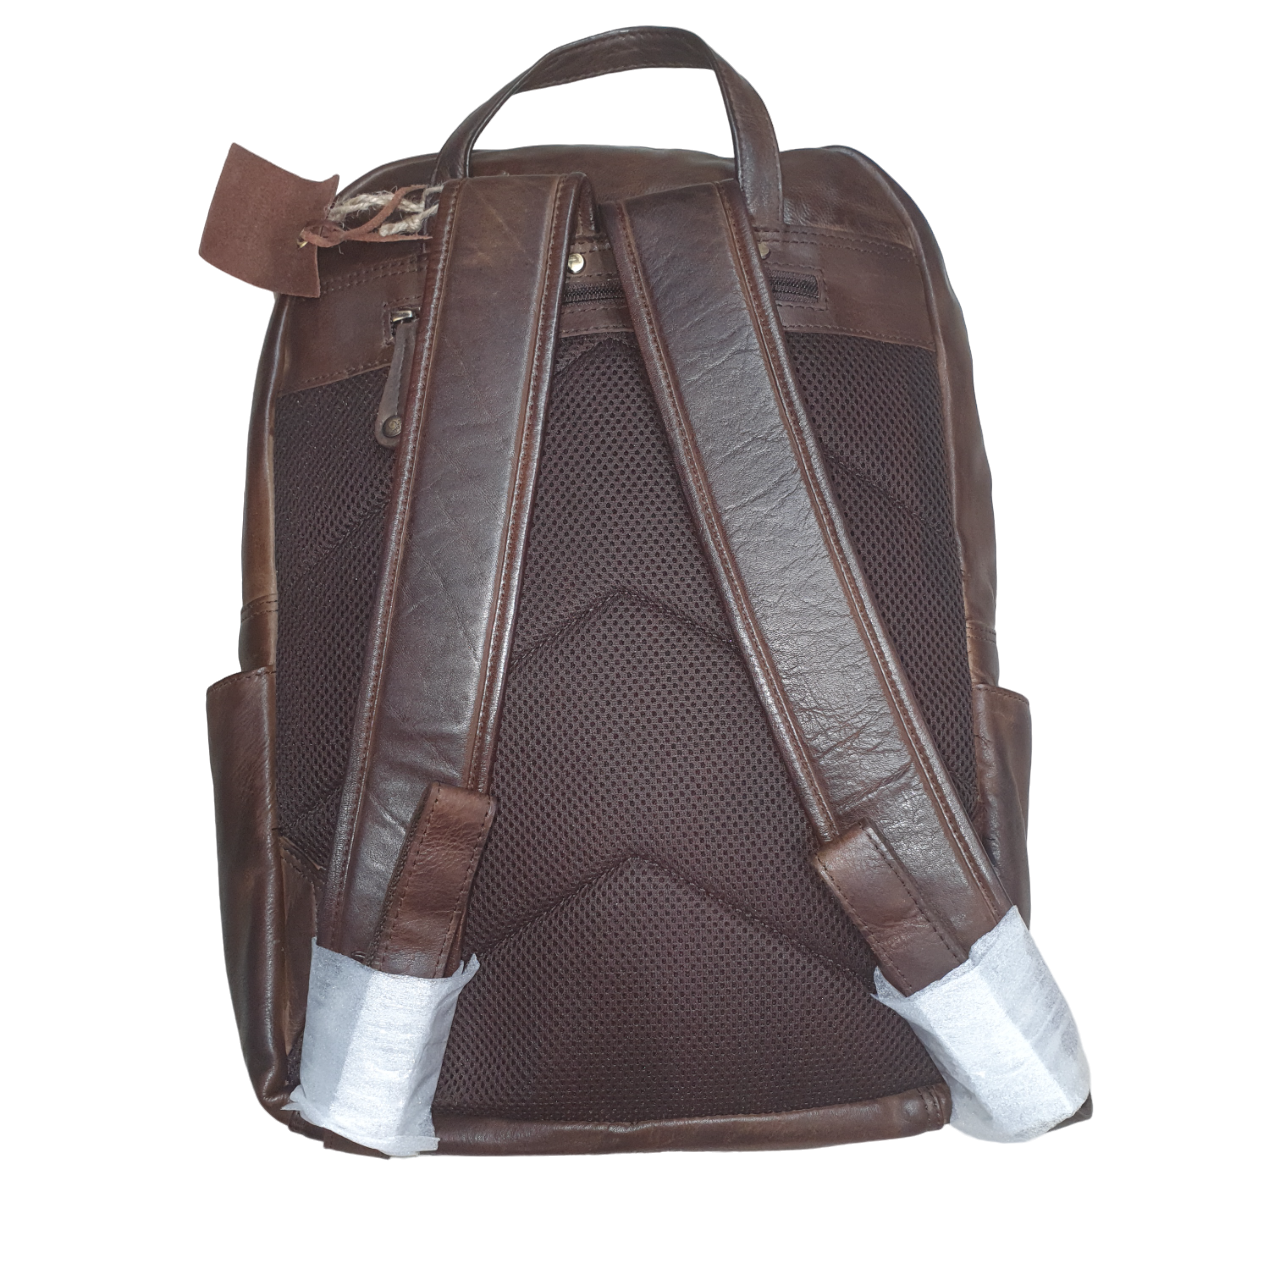 Rugged Hide - Leather Backpack RH-2623 Brussels